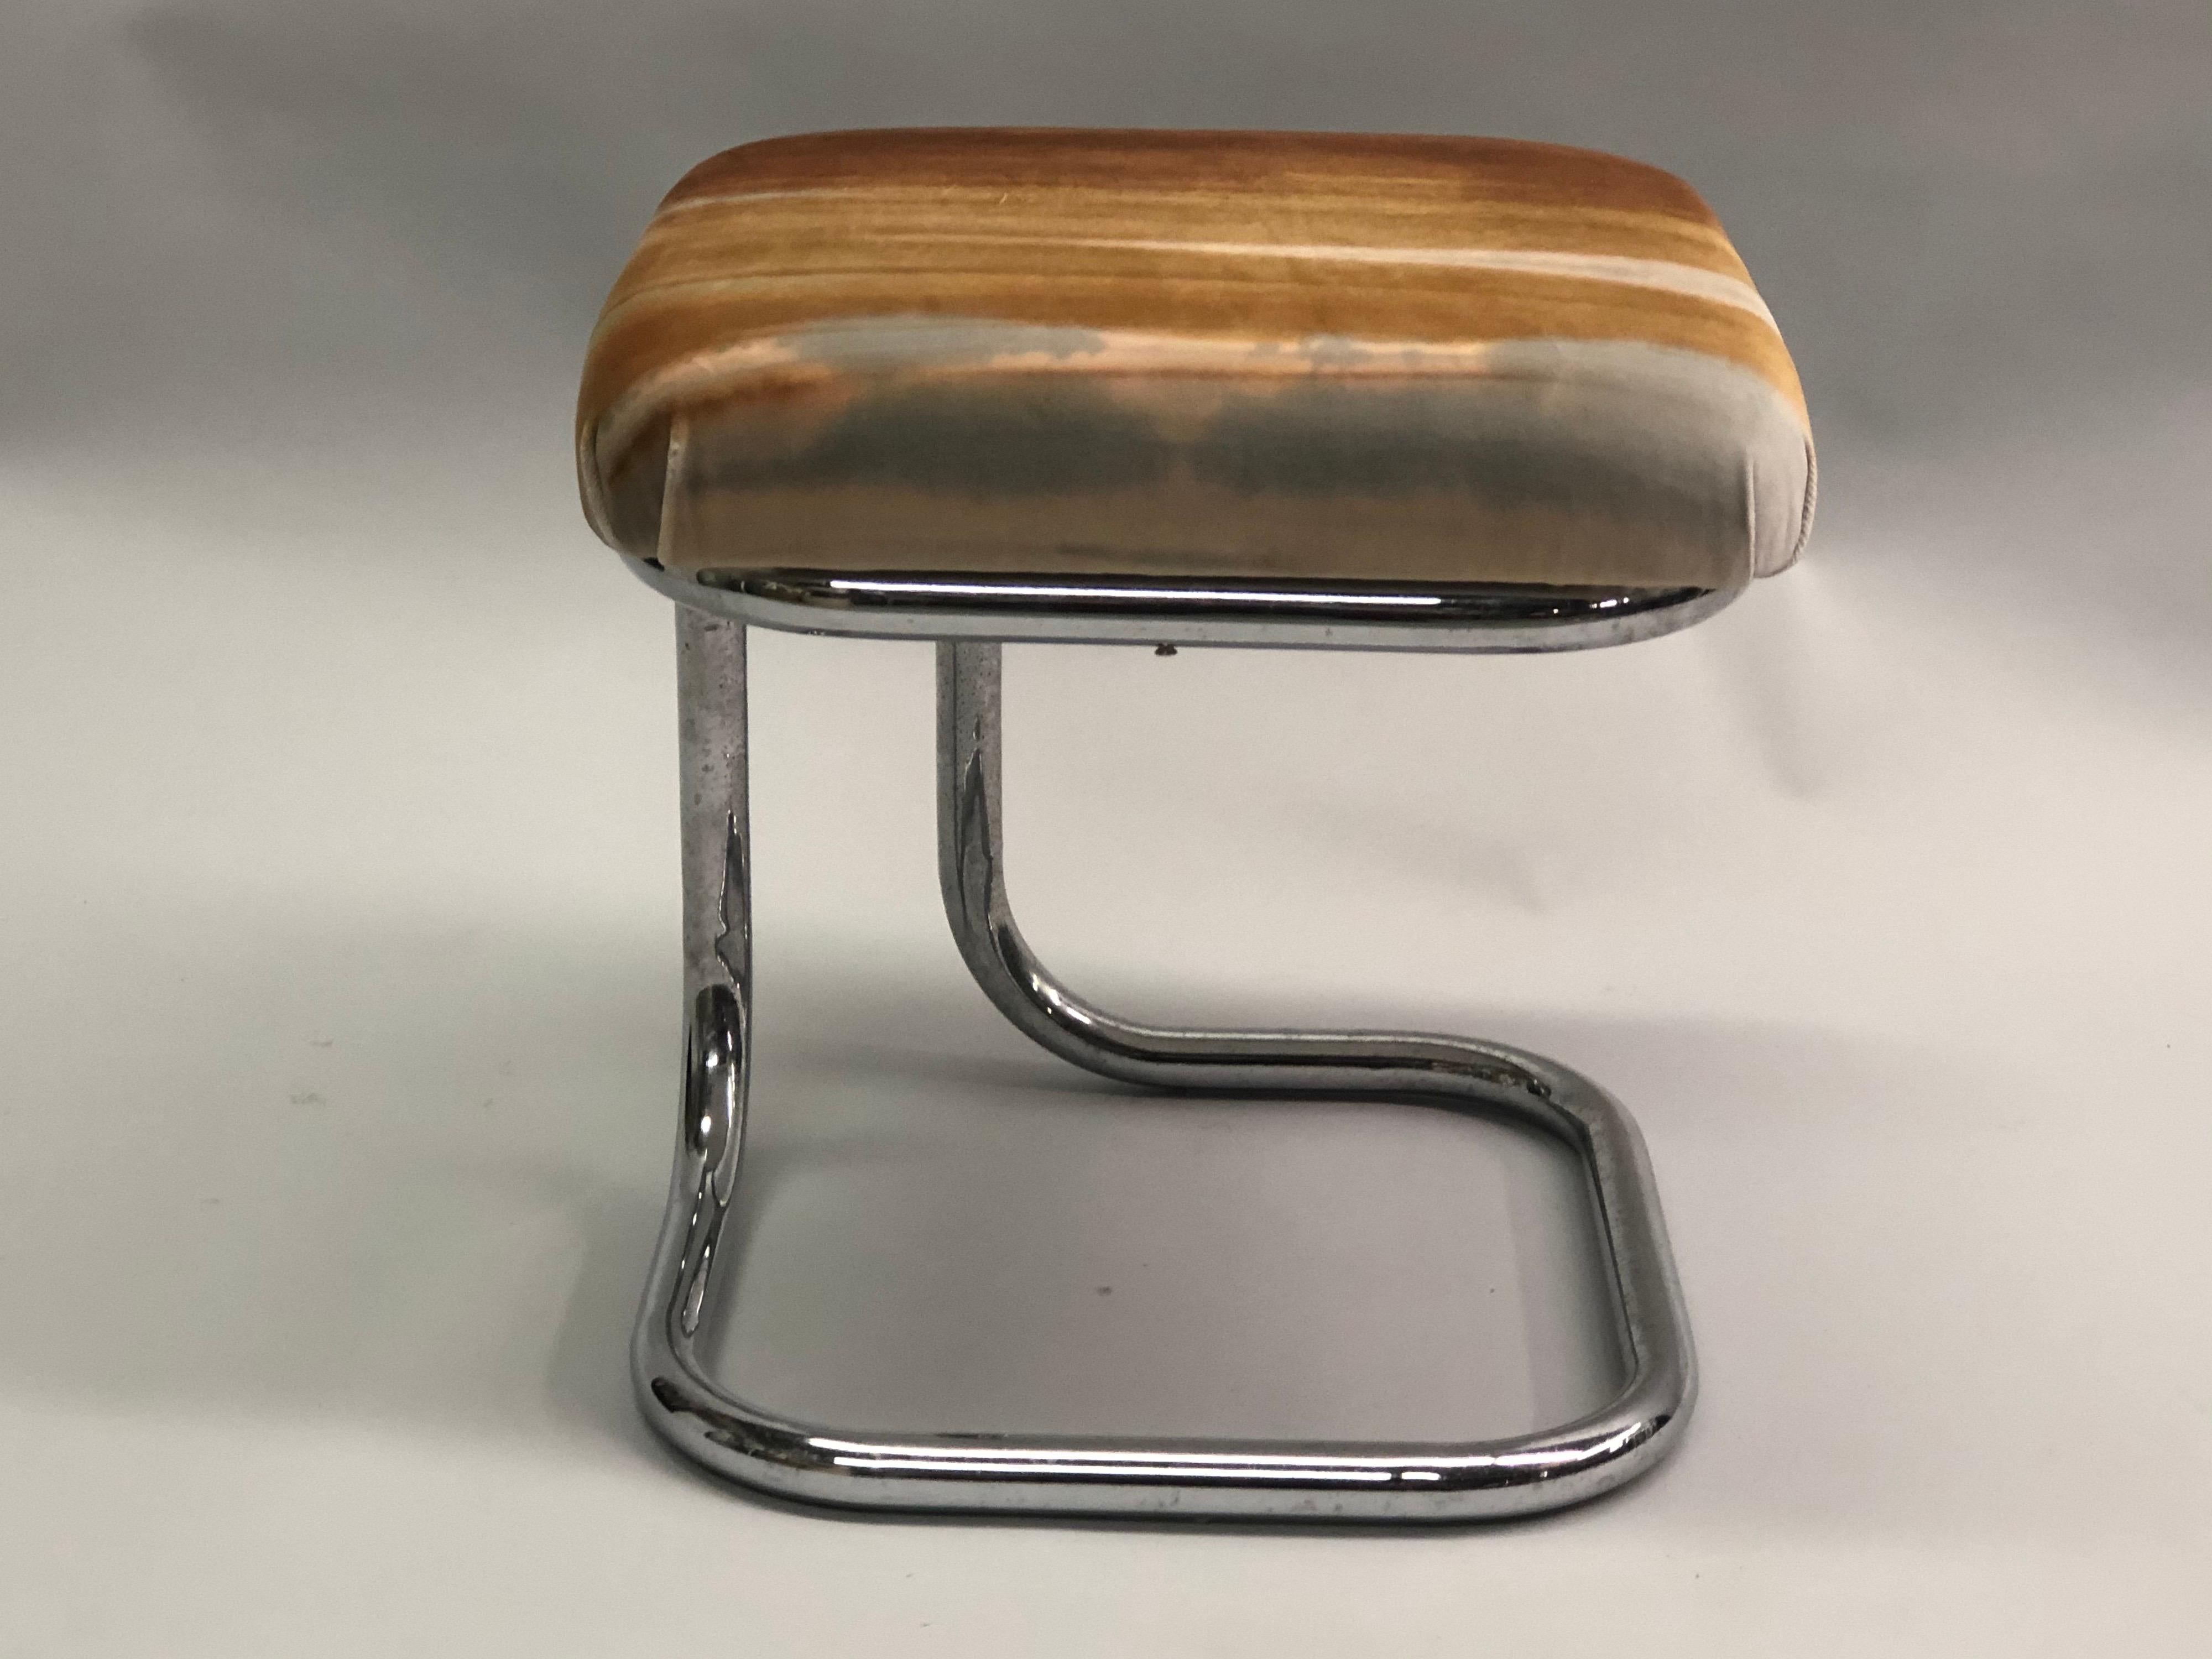 Pair of French Modernist ‘Bauhaus’ Stools with Upholstered Seats by Hermès For Sale 1